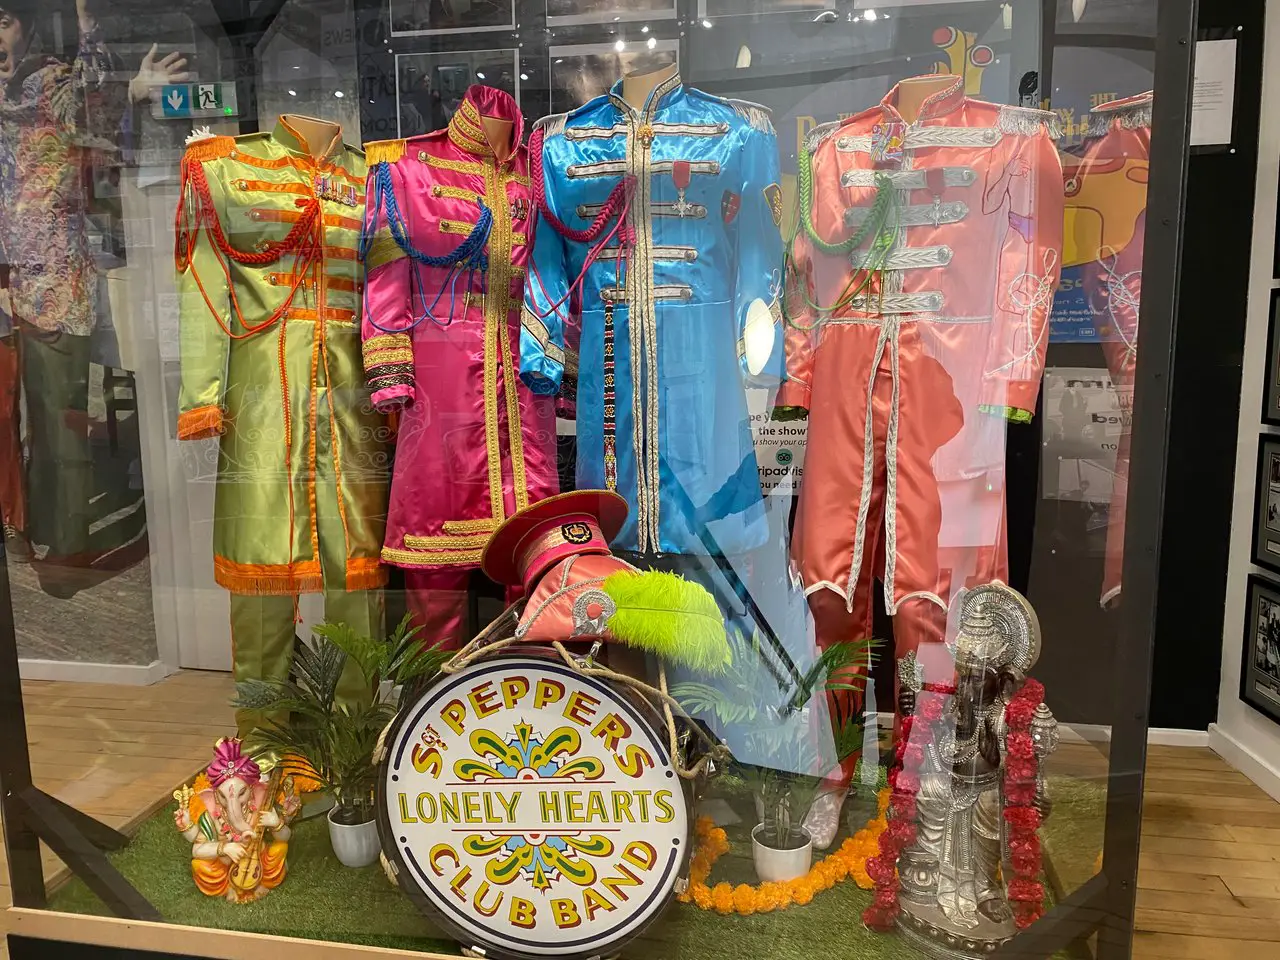 Display case showing the Sgt Pepper's outfits at the Magical Beatles Museum in Liverpool